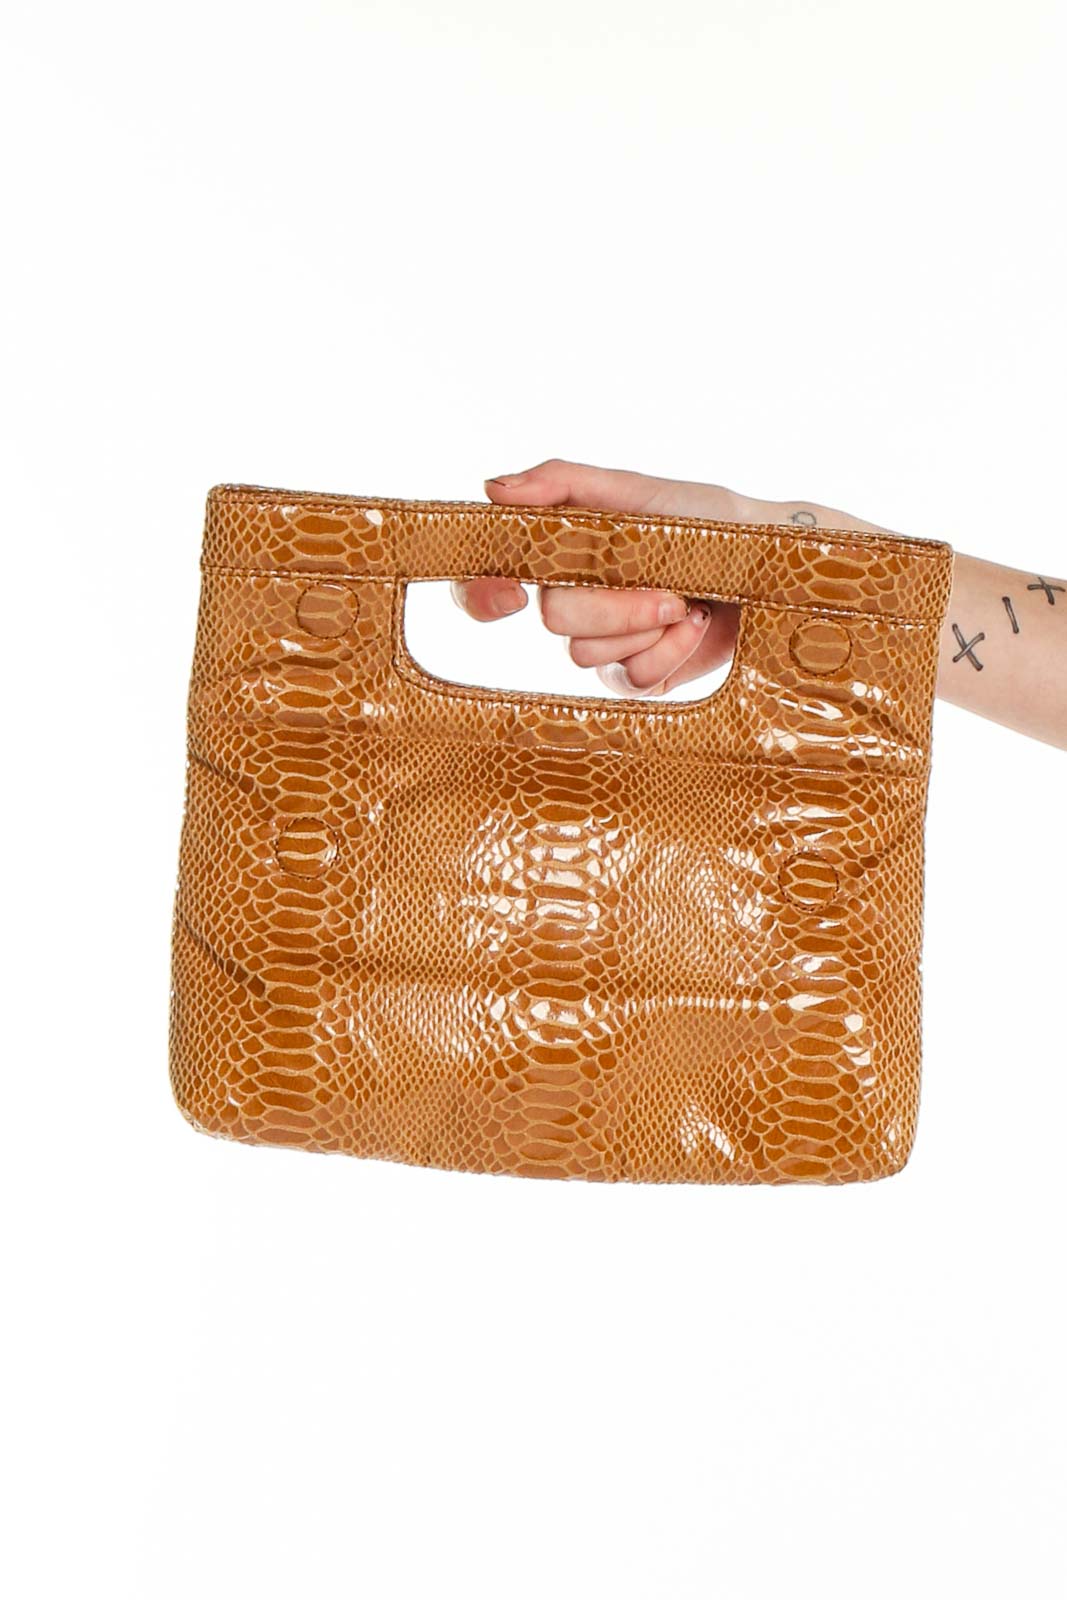 Tan Clutch Front